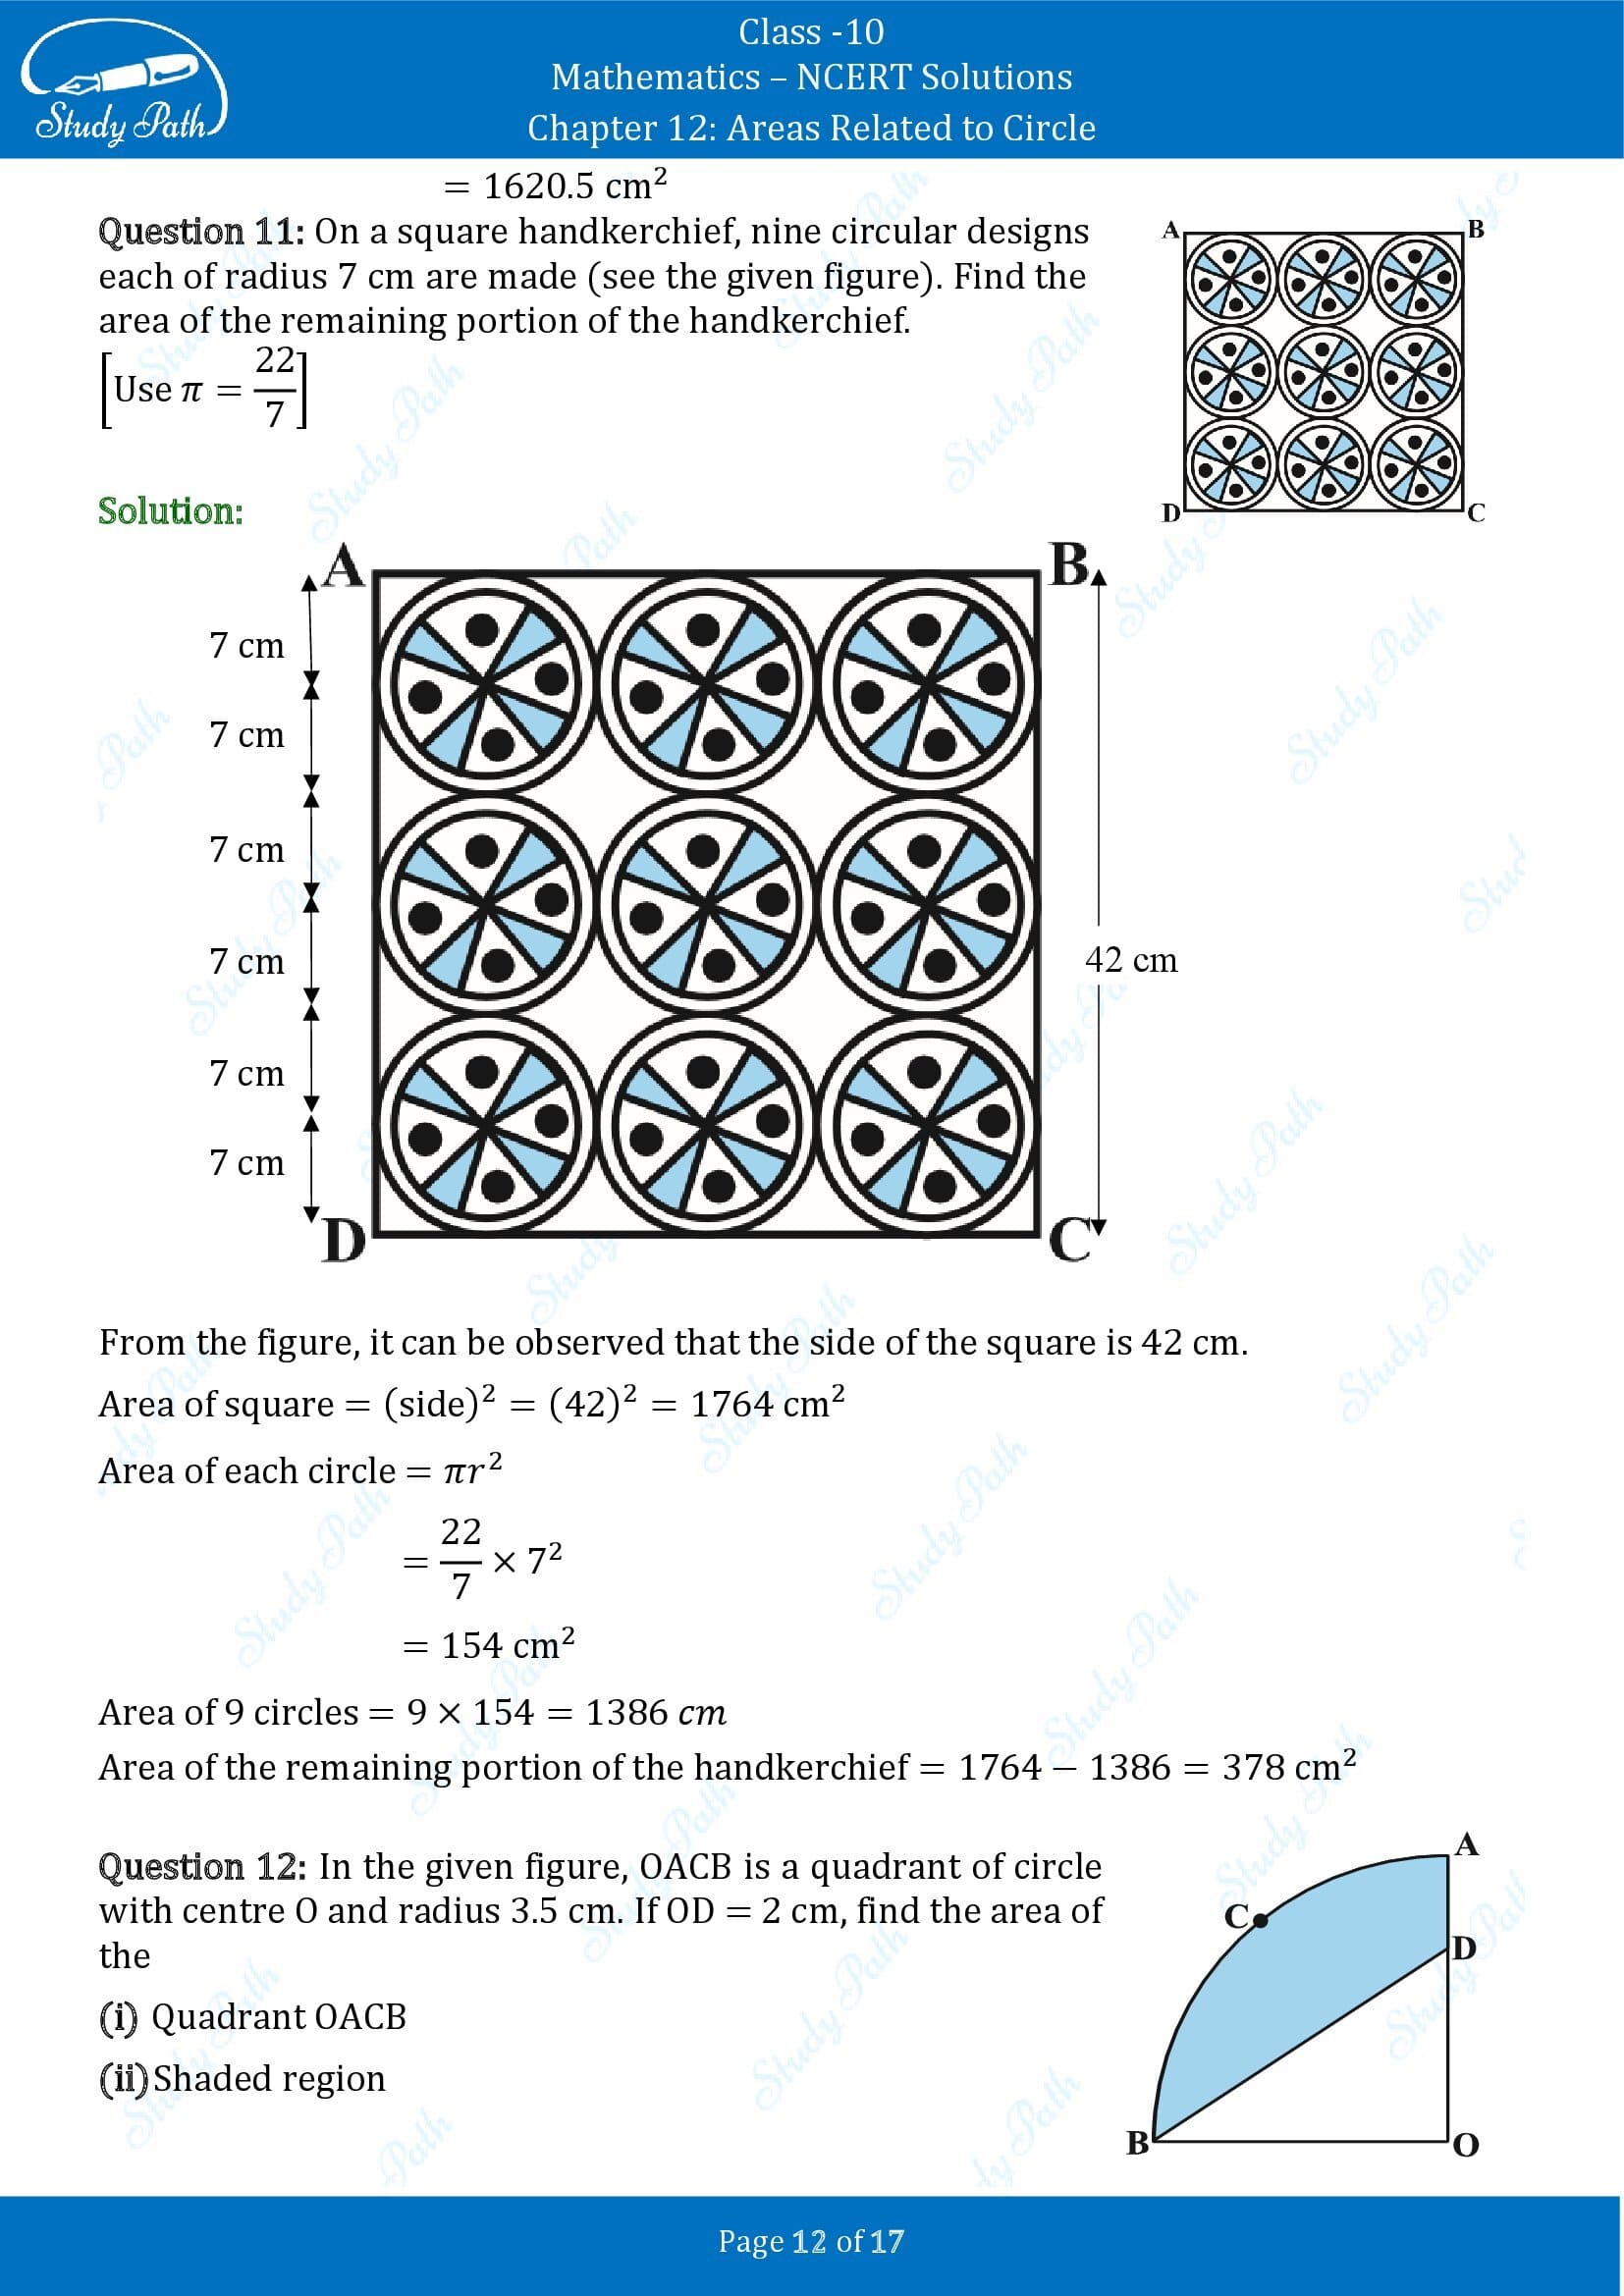 NCERT Solutions for Class 10 Maths Chapter 12 Areas Related to Circles Exercise 12.3 00012